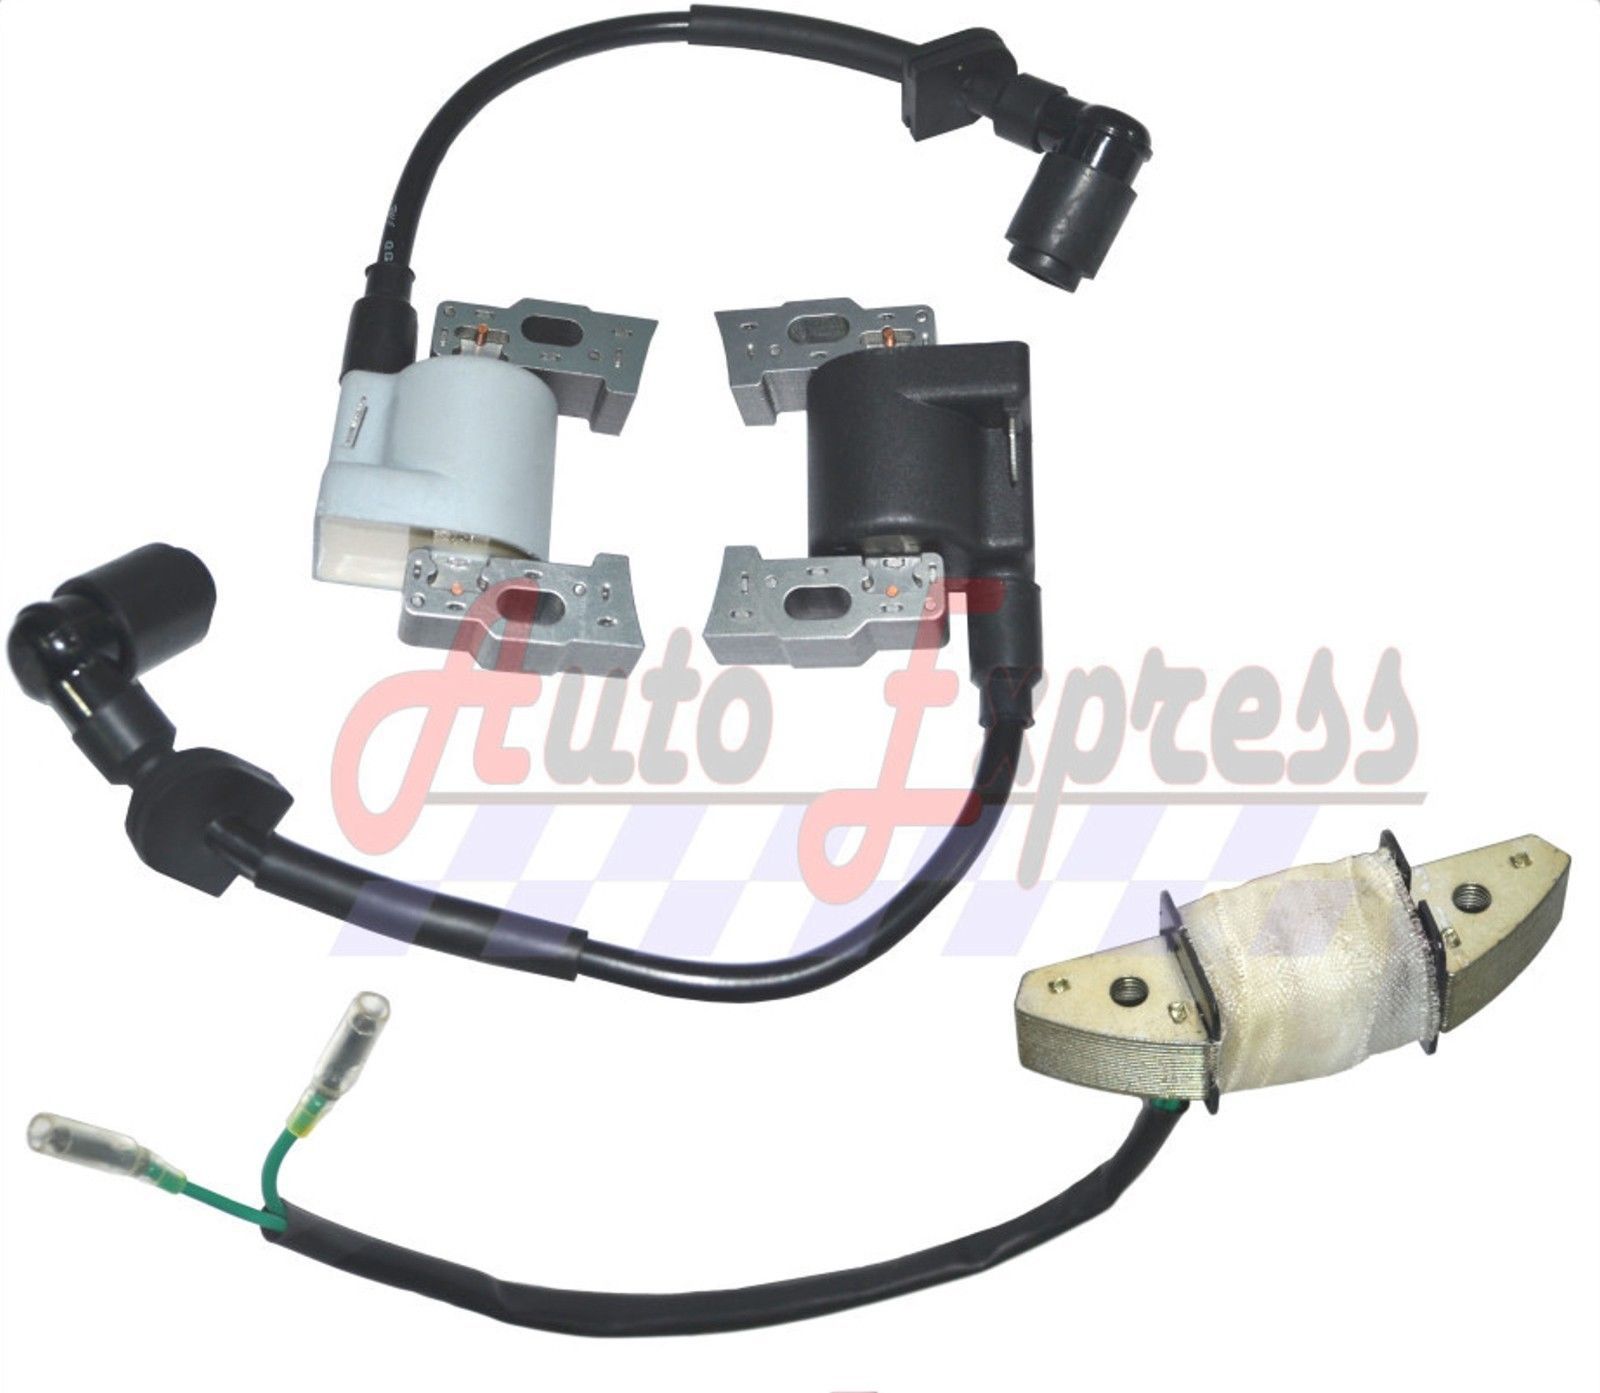 Set of 2 Ignition Coils Left and Right and Stator Charging Coil FITS Honda GX620 - $89.50